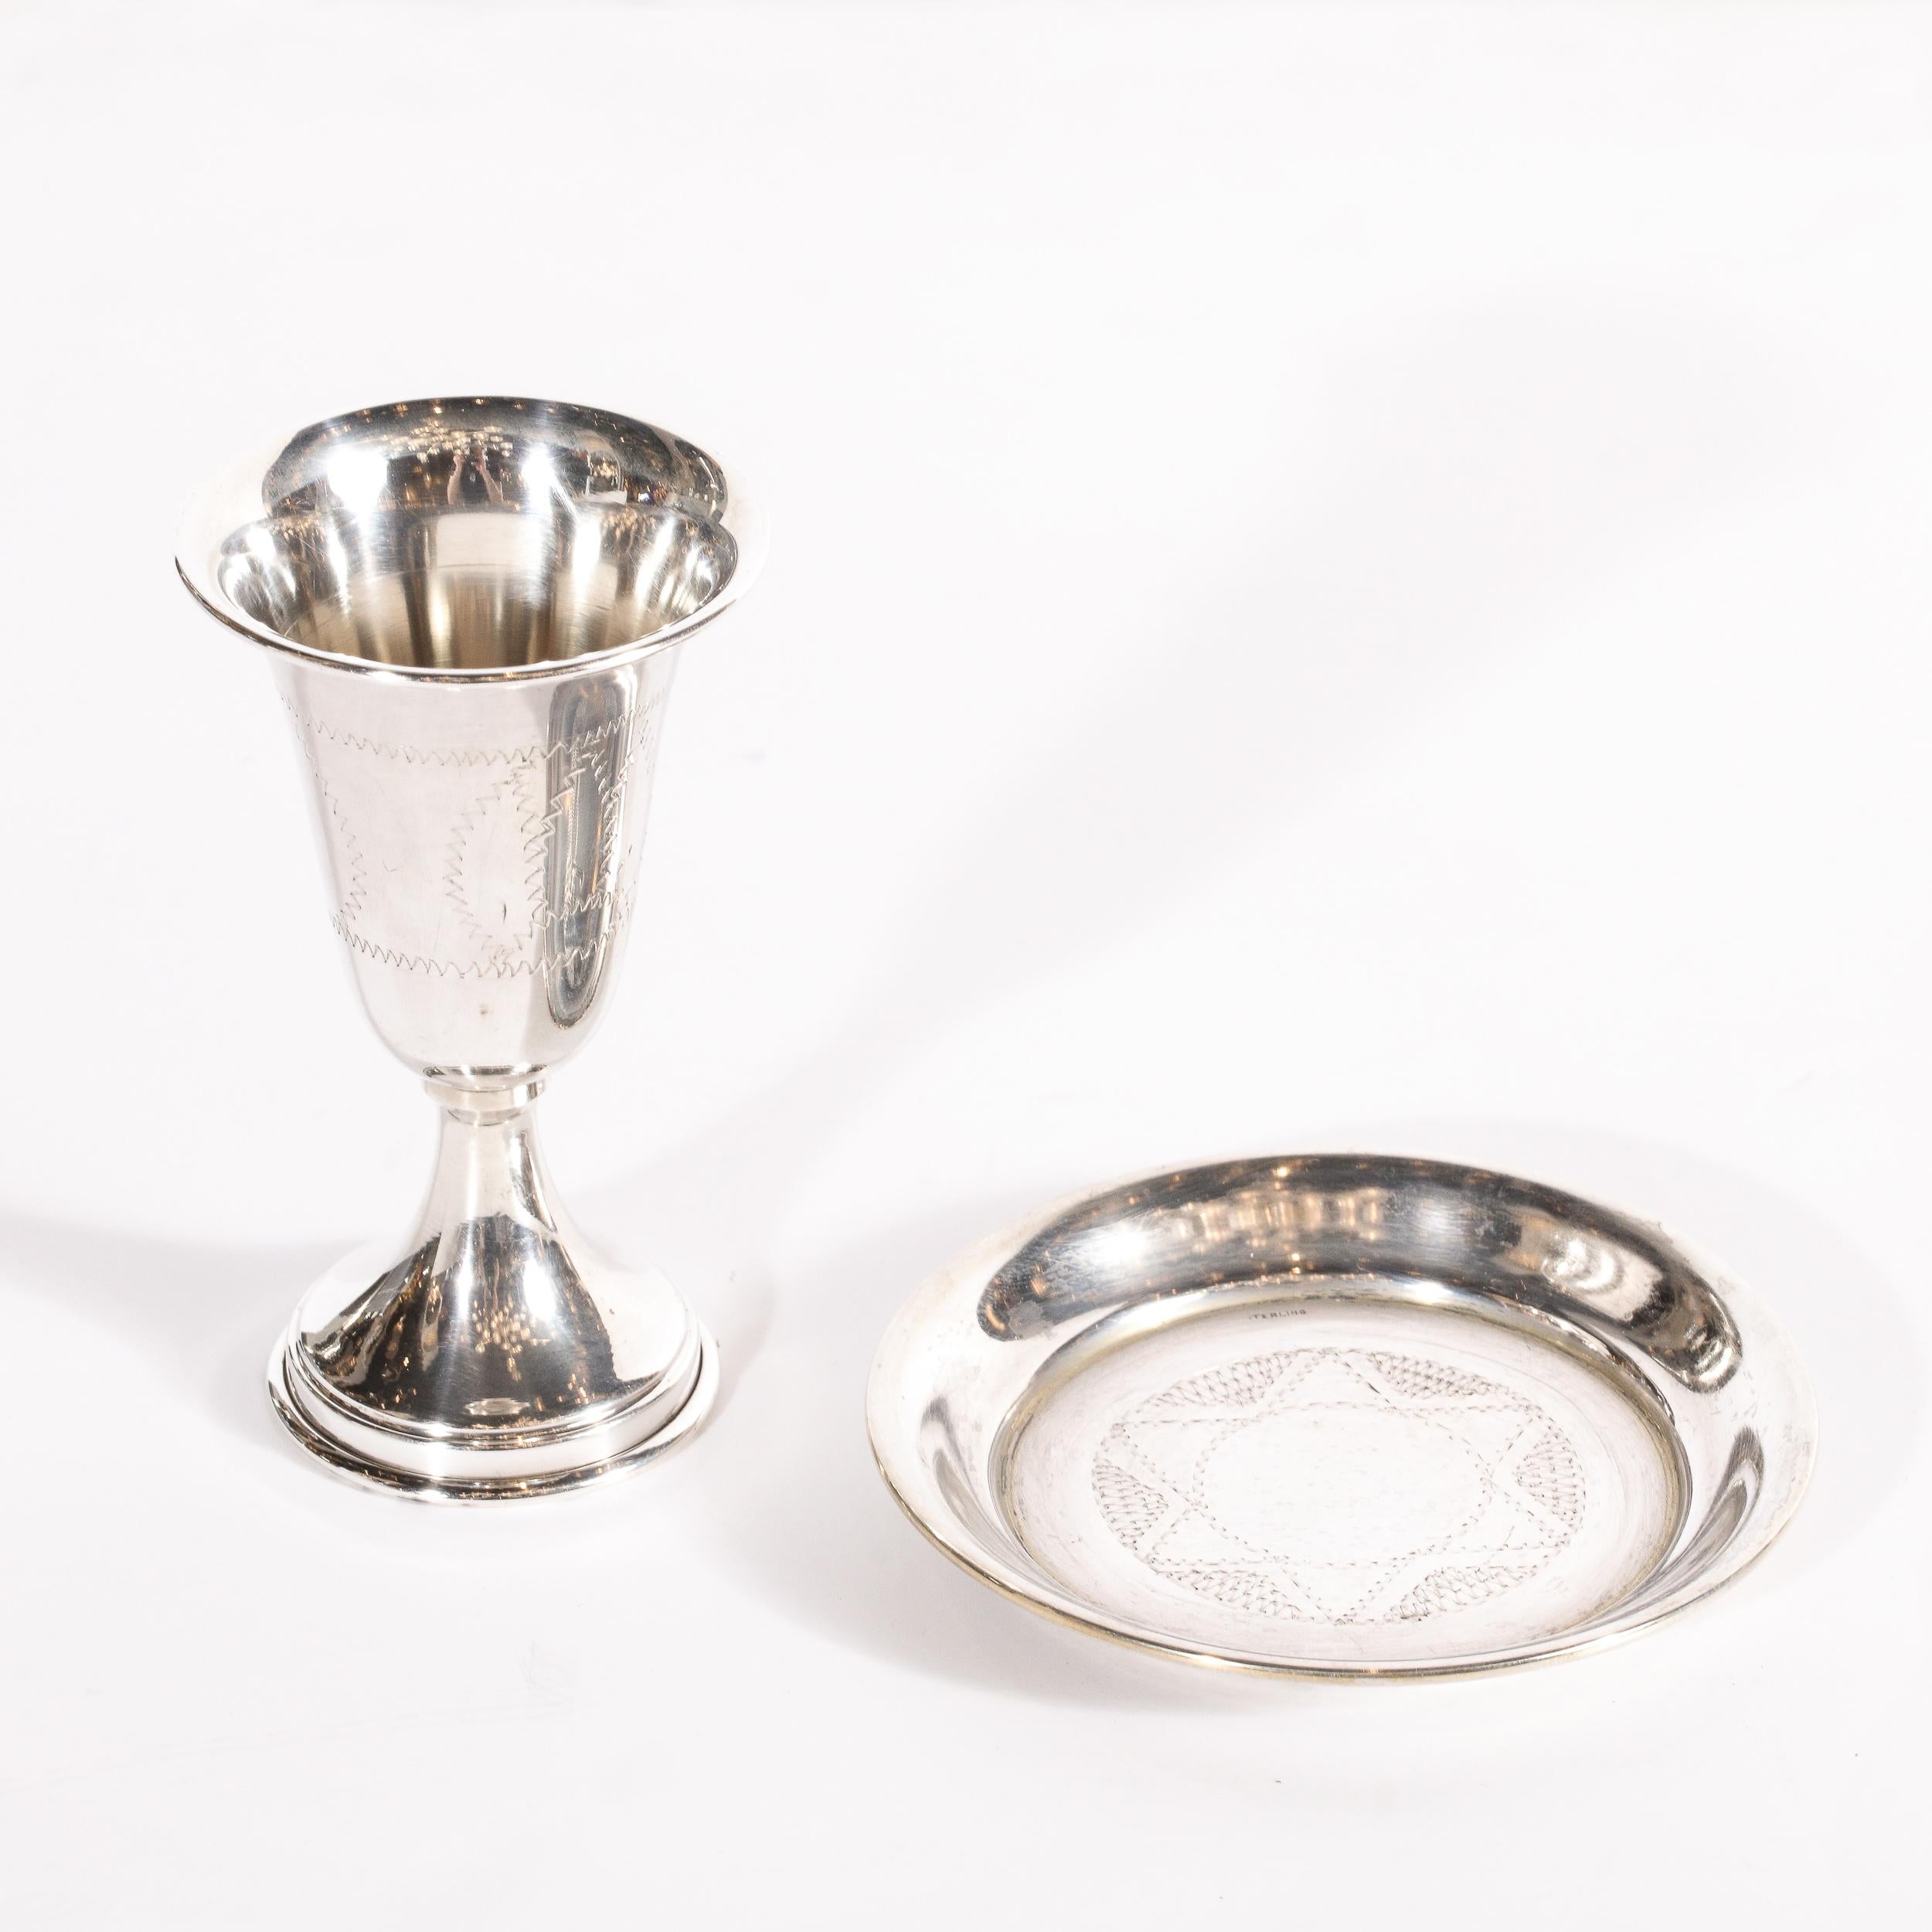 This beautiful ESCO (Eastern Sterling Company) .925 Sterling Silver Vermeil Sabath Kiddush Goblet Cup and charger were realized in the United States. The cup features a flared circular mouth and a tapered stem with hand chased designs throughout.